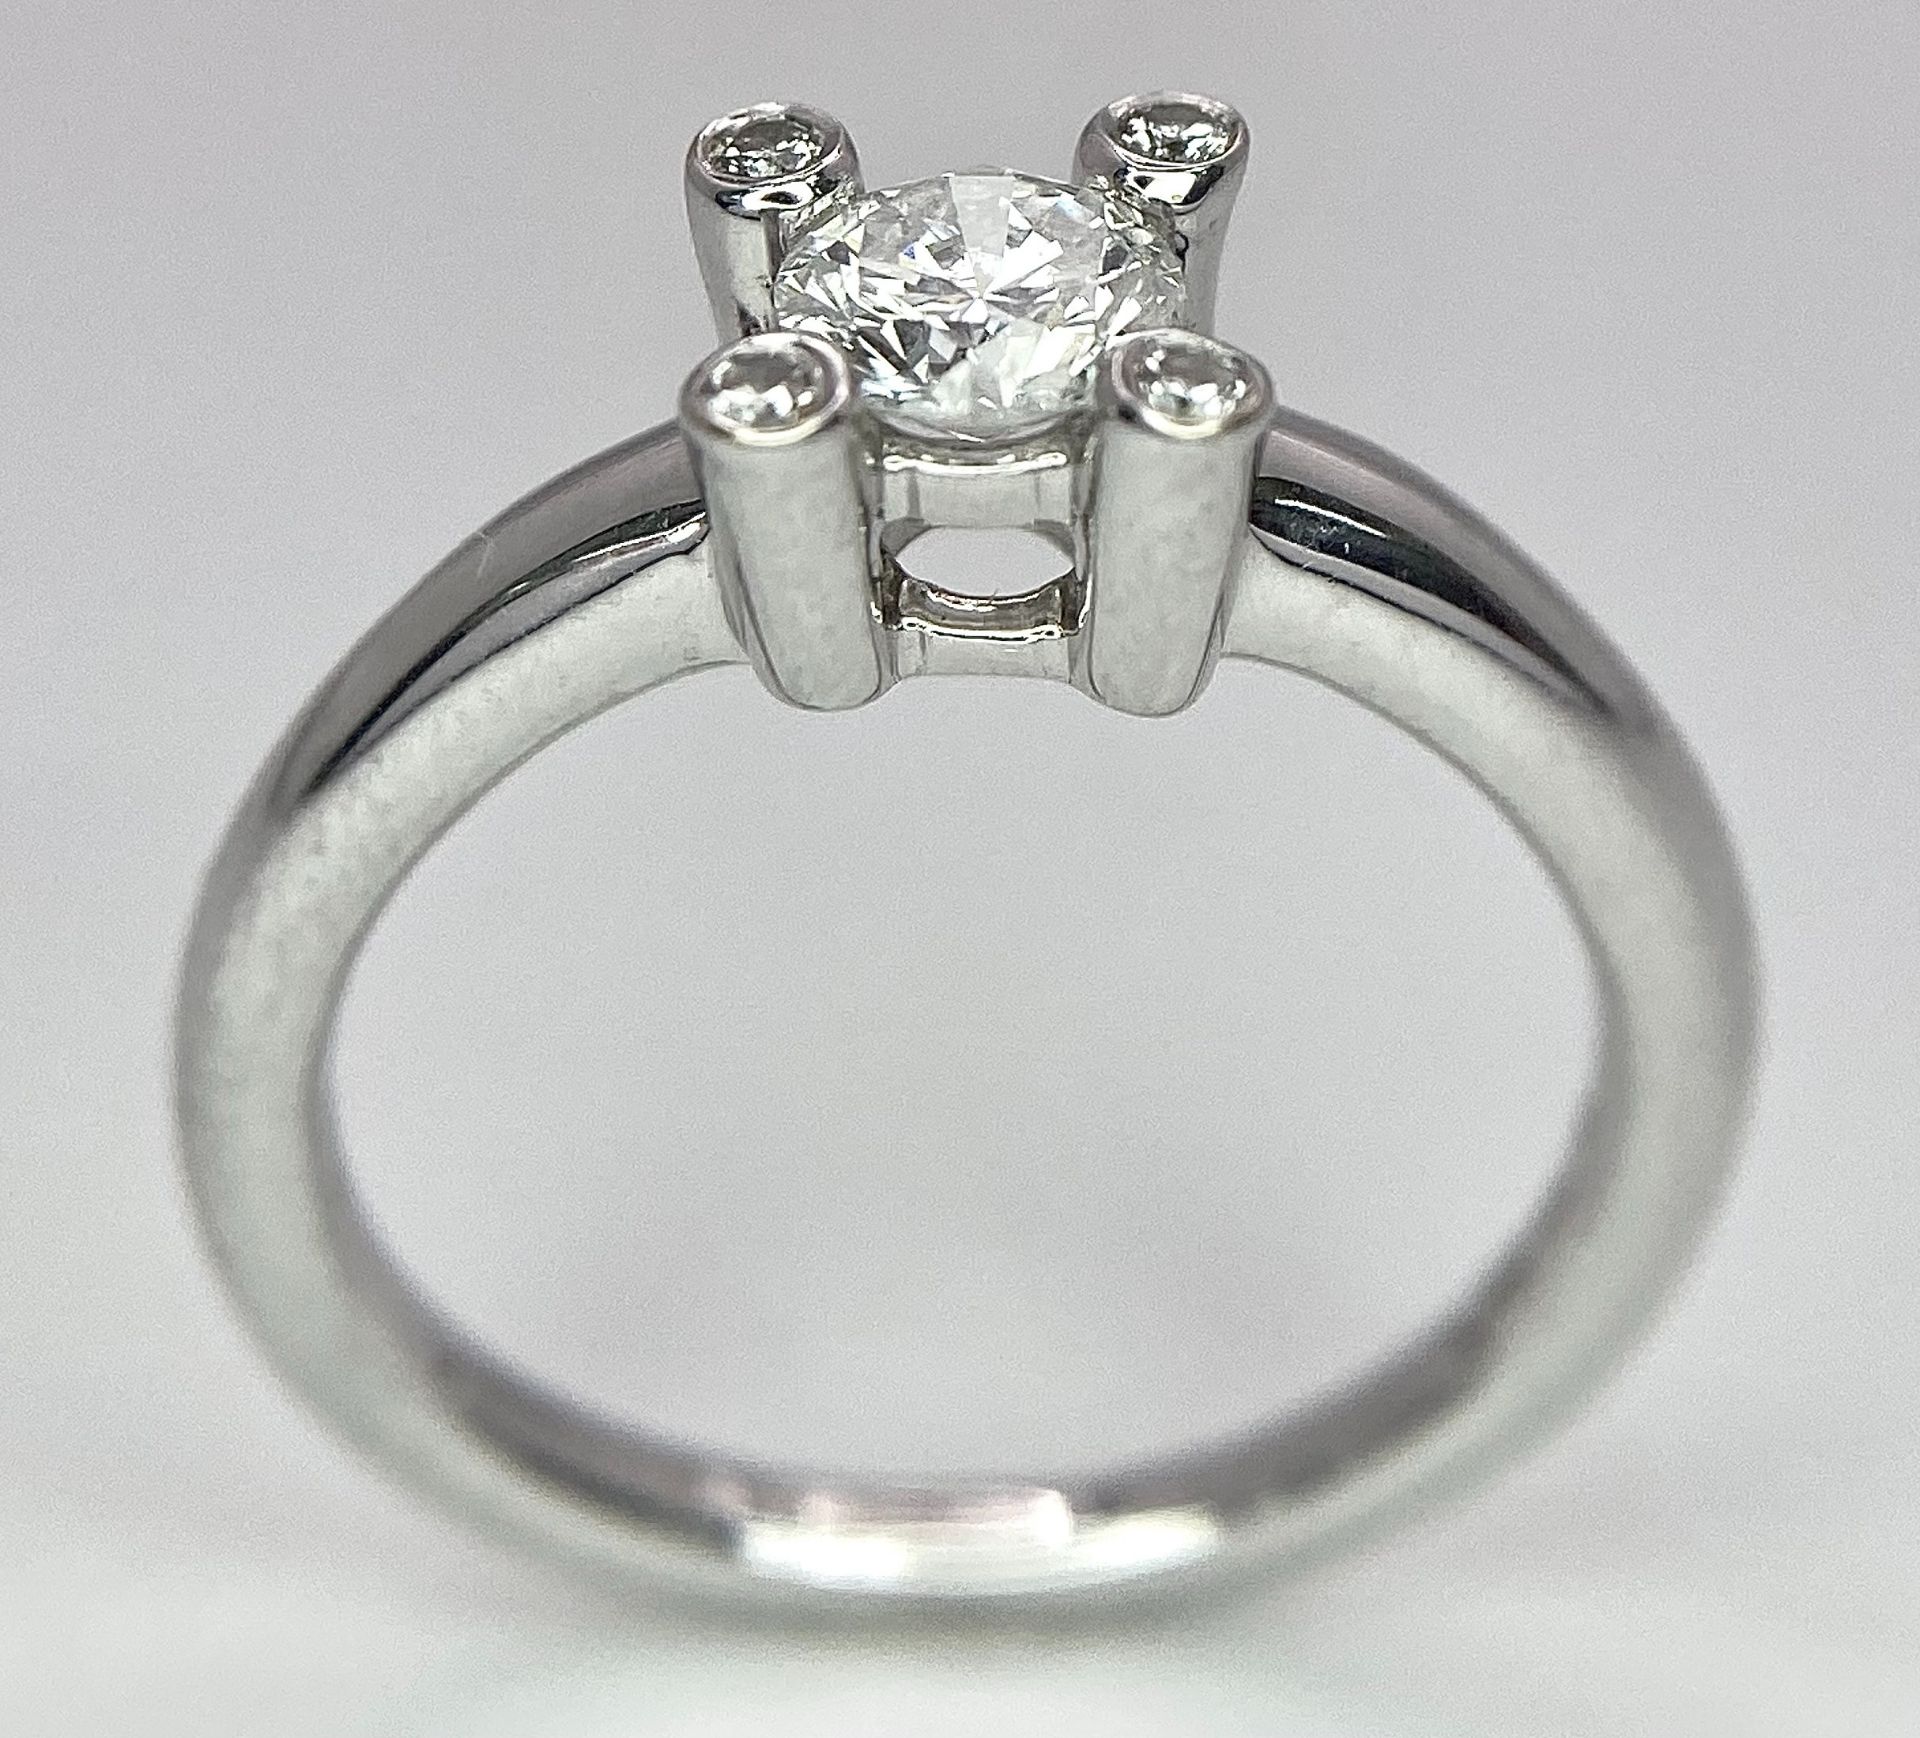 AN 18K WHITE GOLD DIAMOND SOLITAIRE RING WITH FOUR DIAMOND TURRETS - 0.50CT 4.6G. SIZE M 1/2. - Image 3 of 10